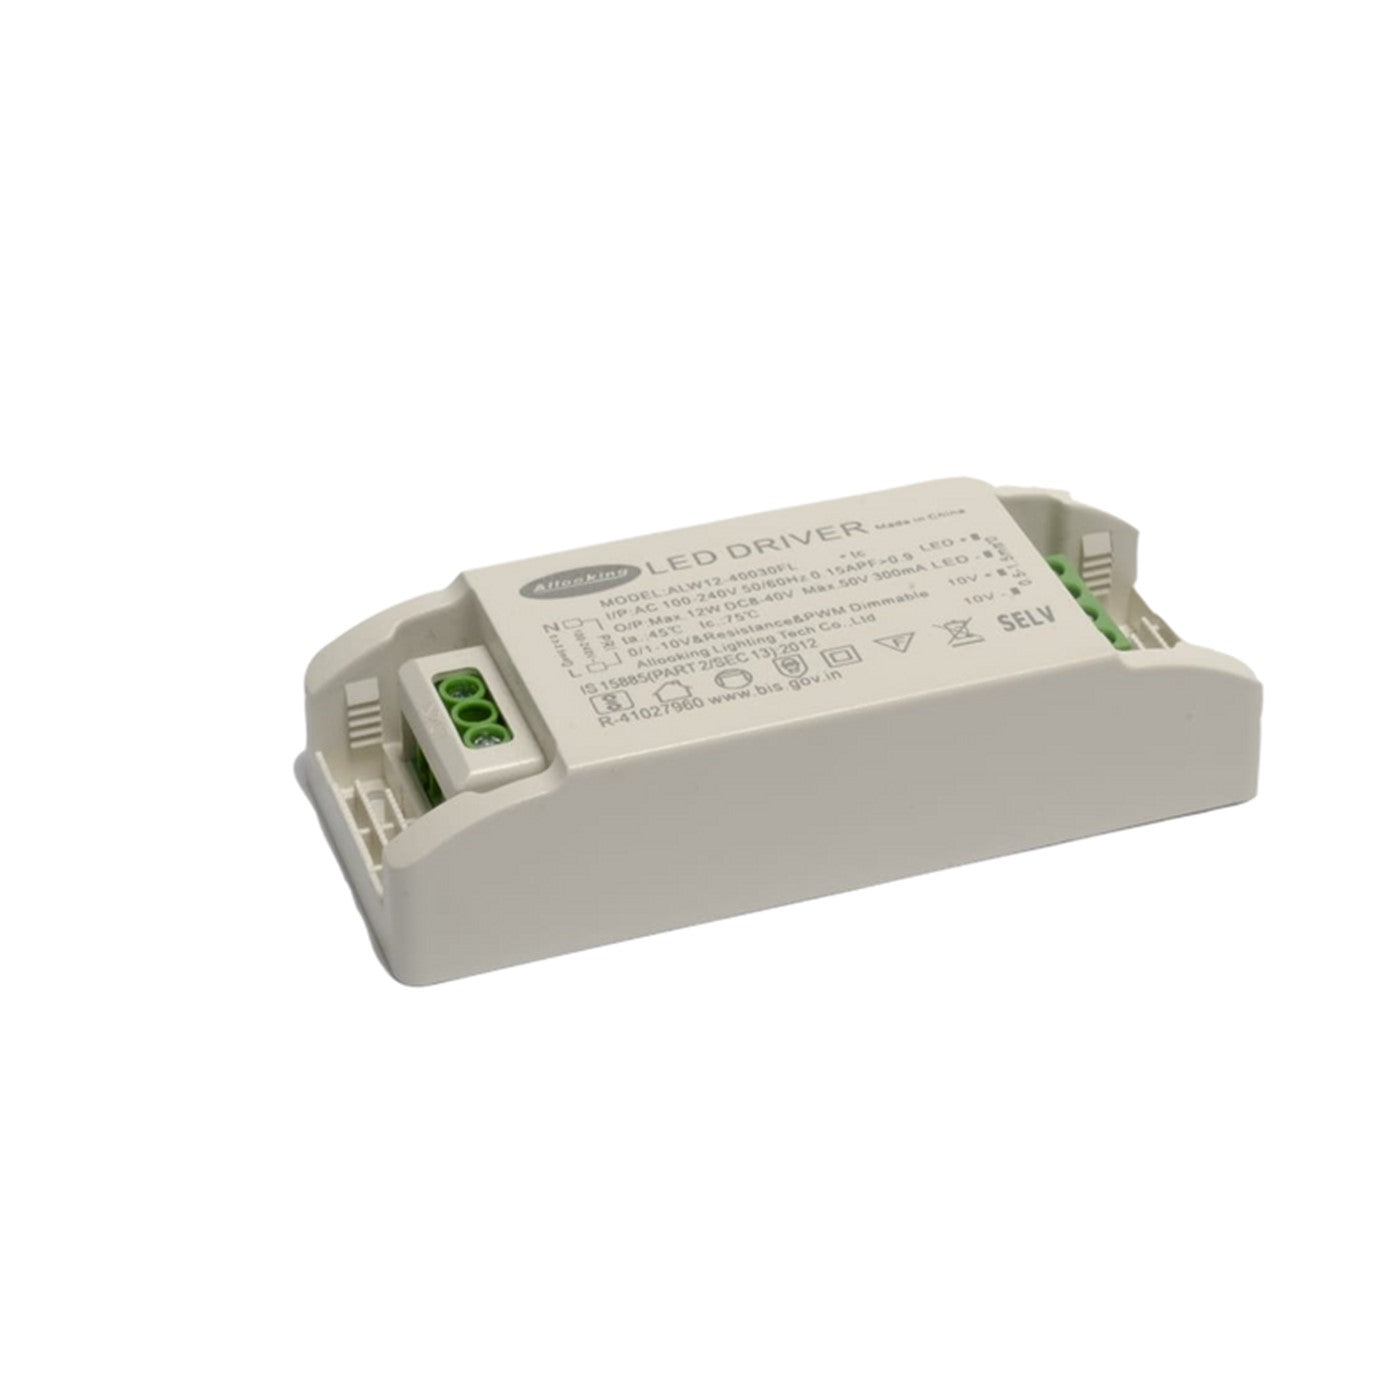 Allooking 8-43v 200ma 8W Constant Current Analogue Dimmable Driver